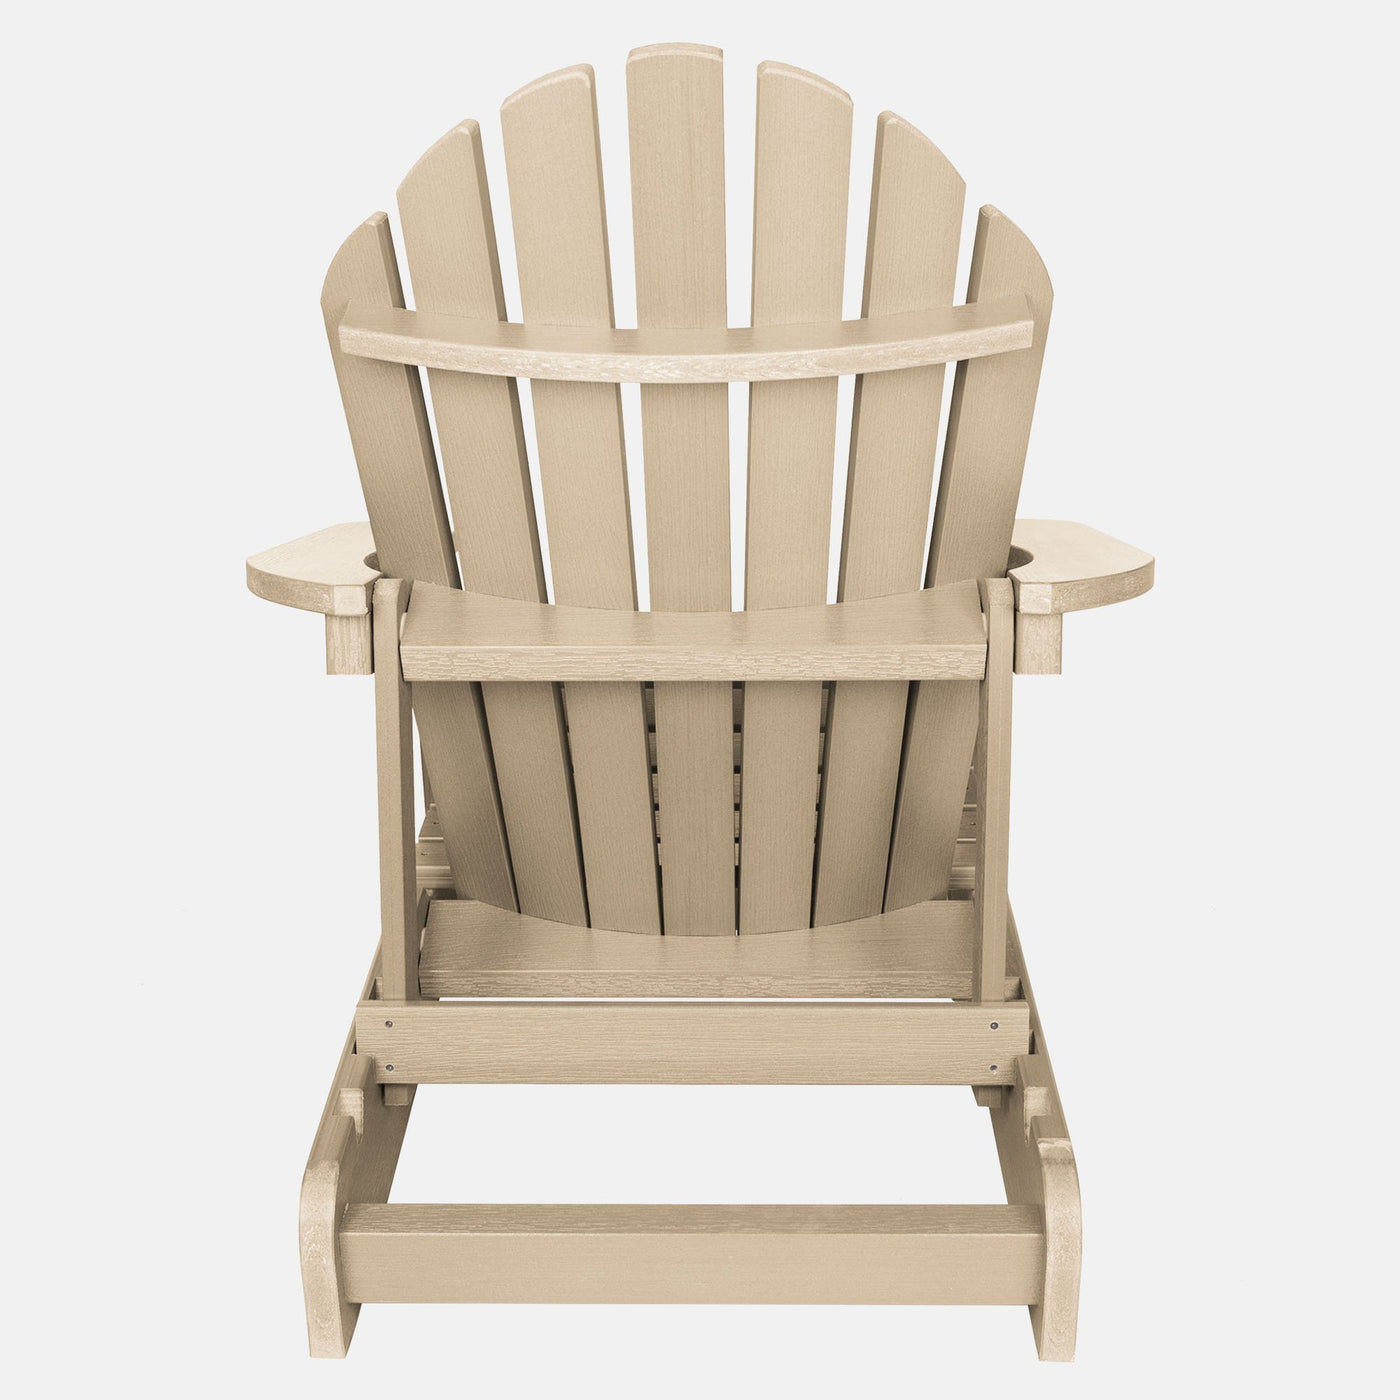 Back view of Hamilton Adirondack chair in Tuscan Taupe